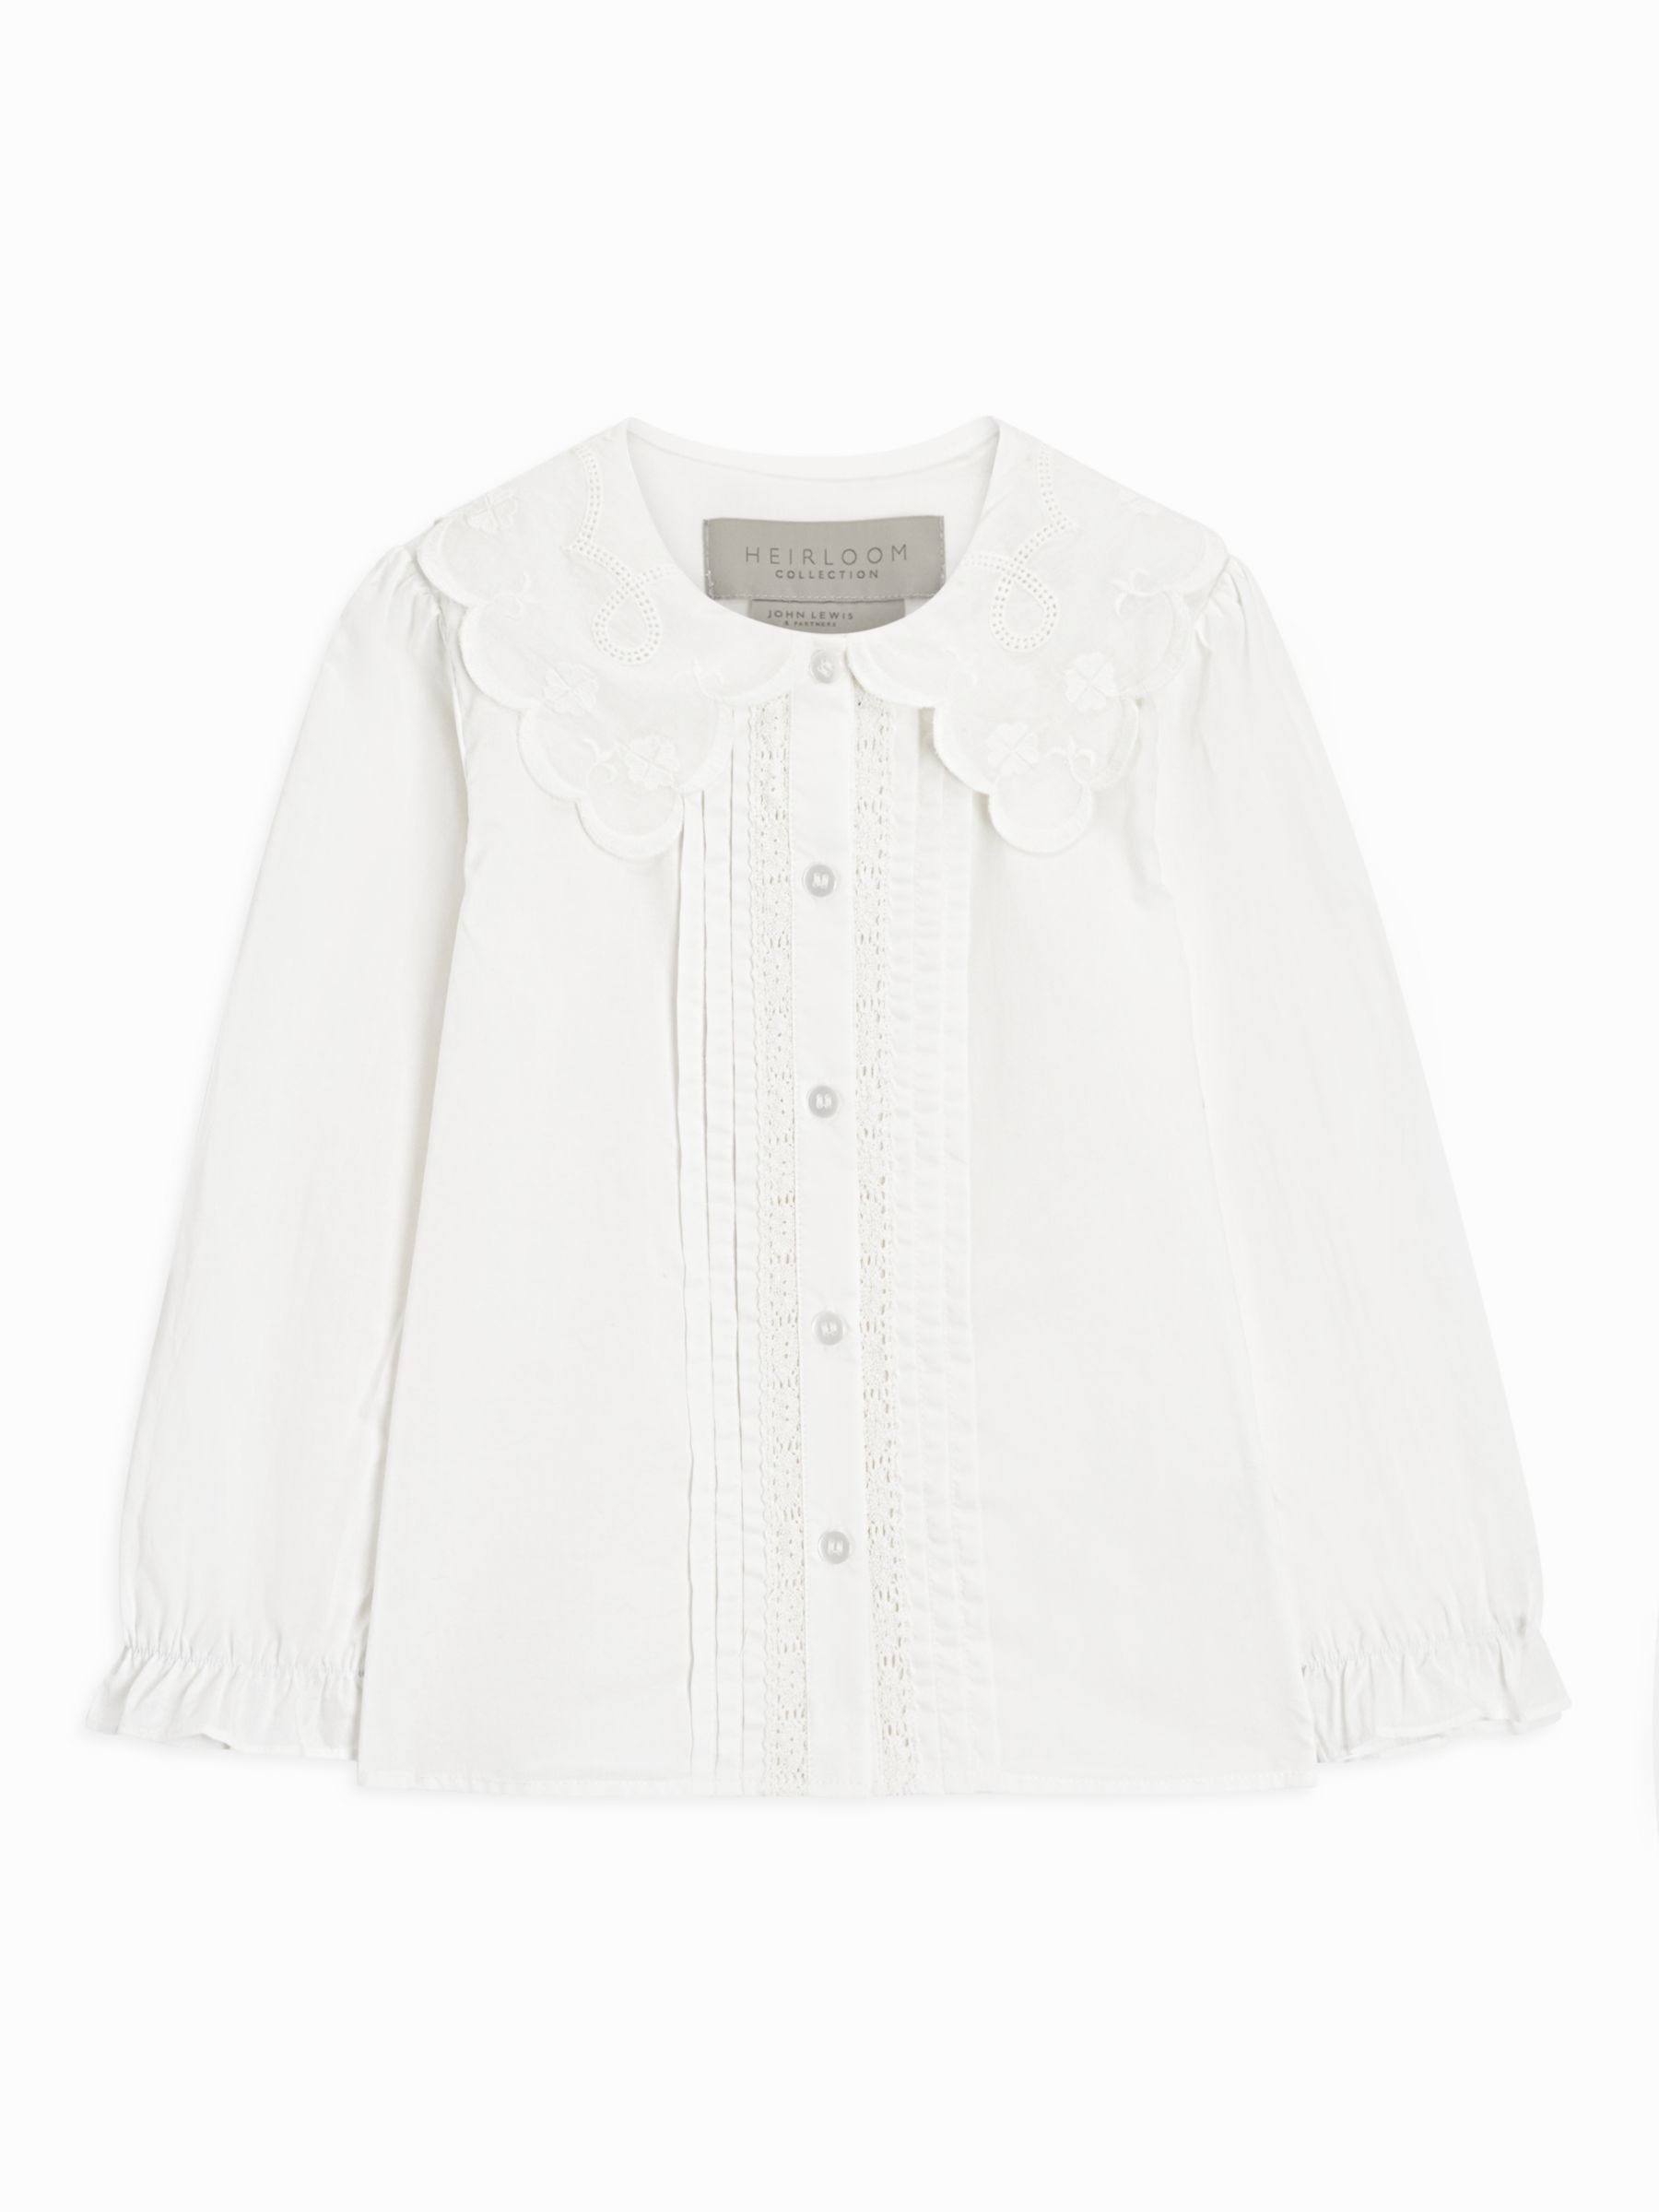 John Lewis Heirloom Collection Kids' Lace Cotton Blouse, Cream at John ...